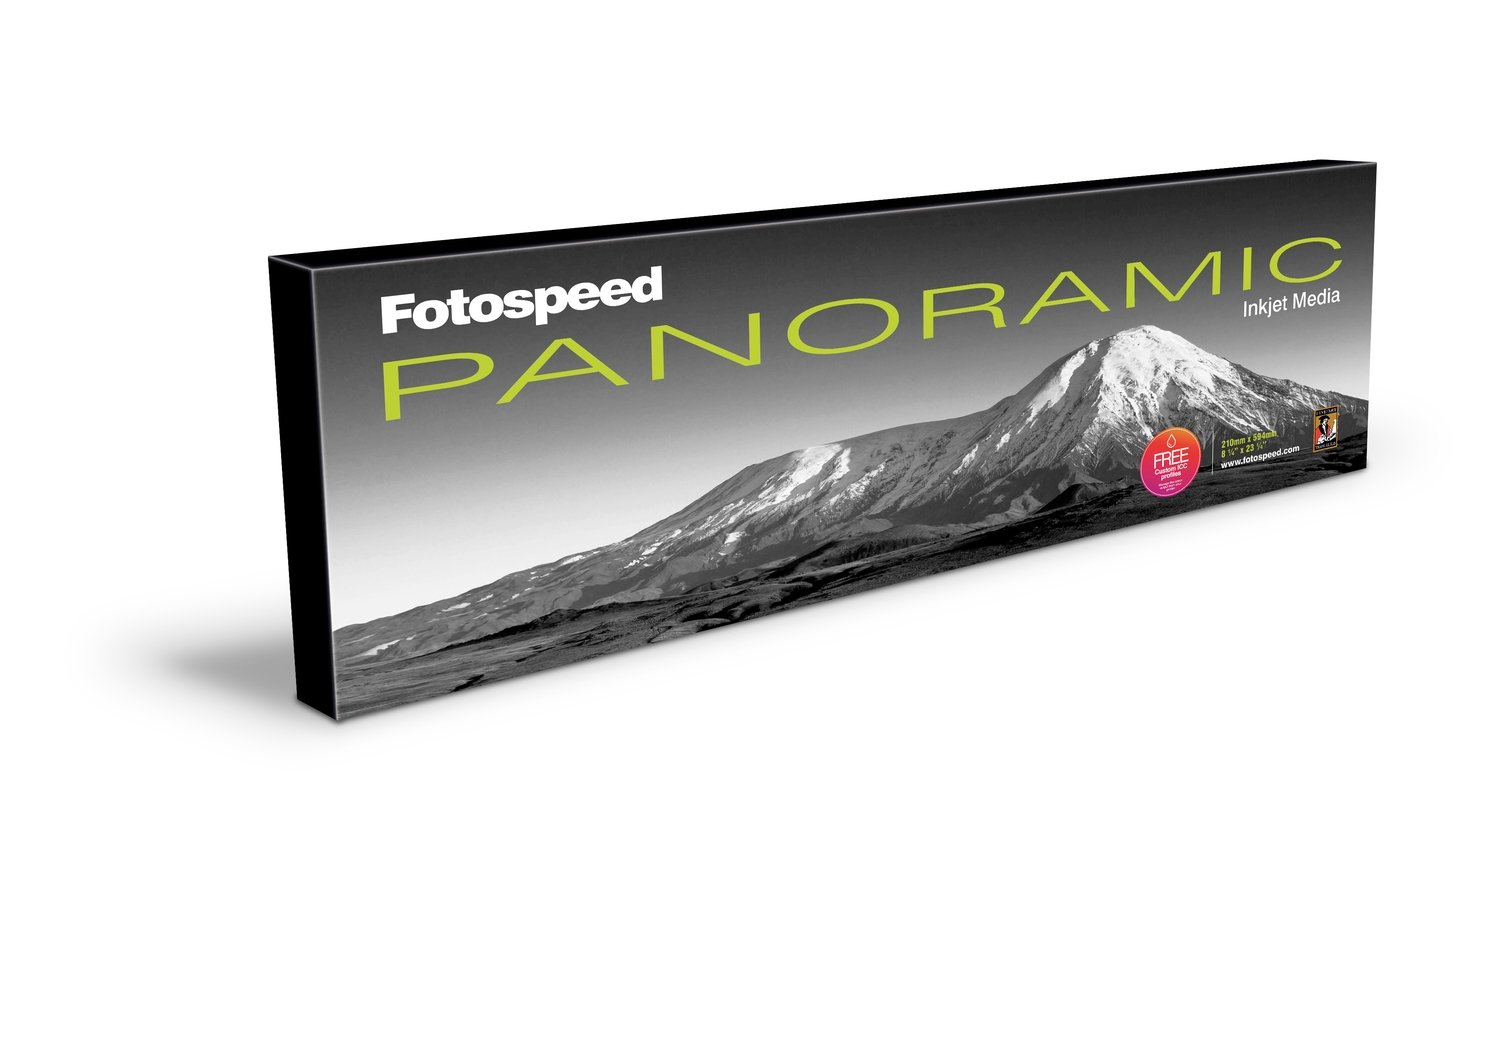 Fotospeed Panoramic Test Pack (PANORAMIC 210x594mm, 24 sheets) - 7D609